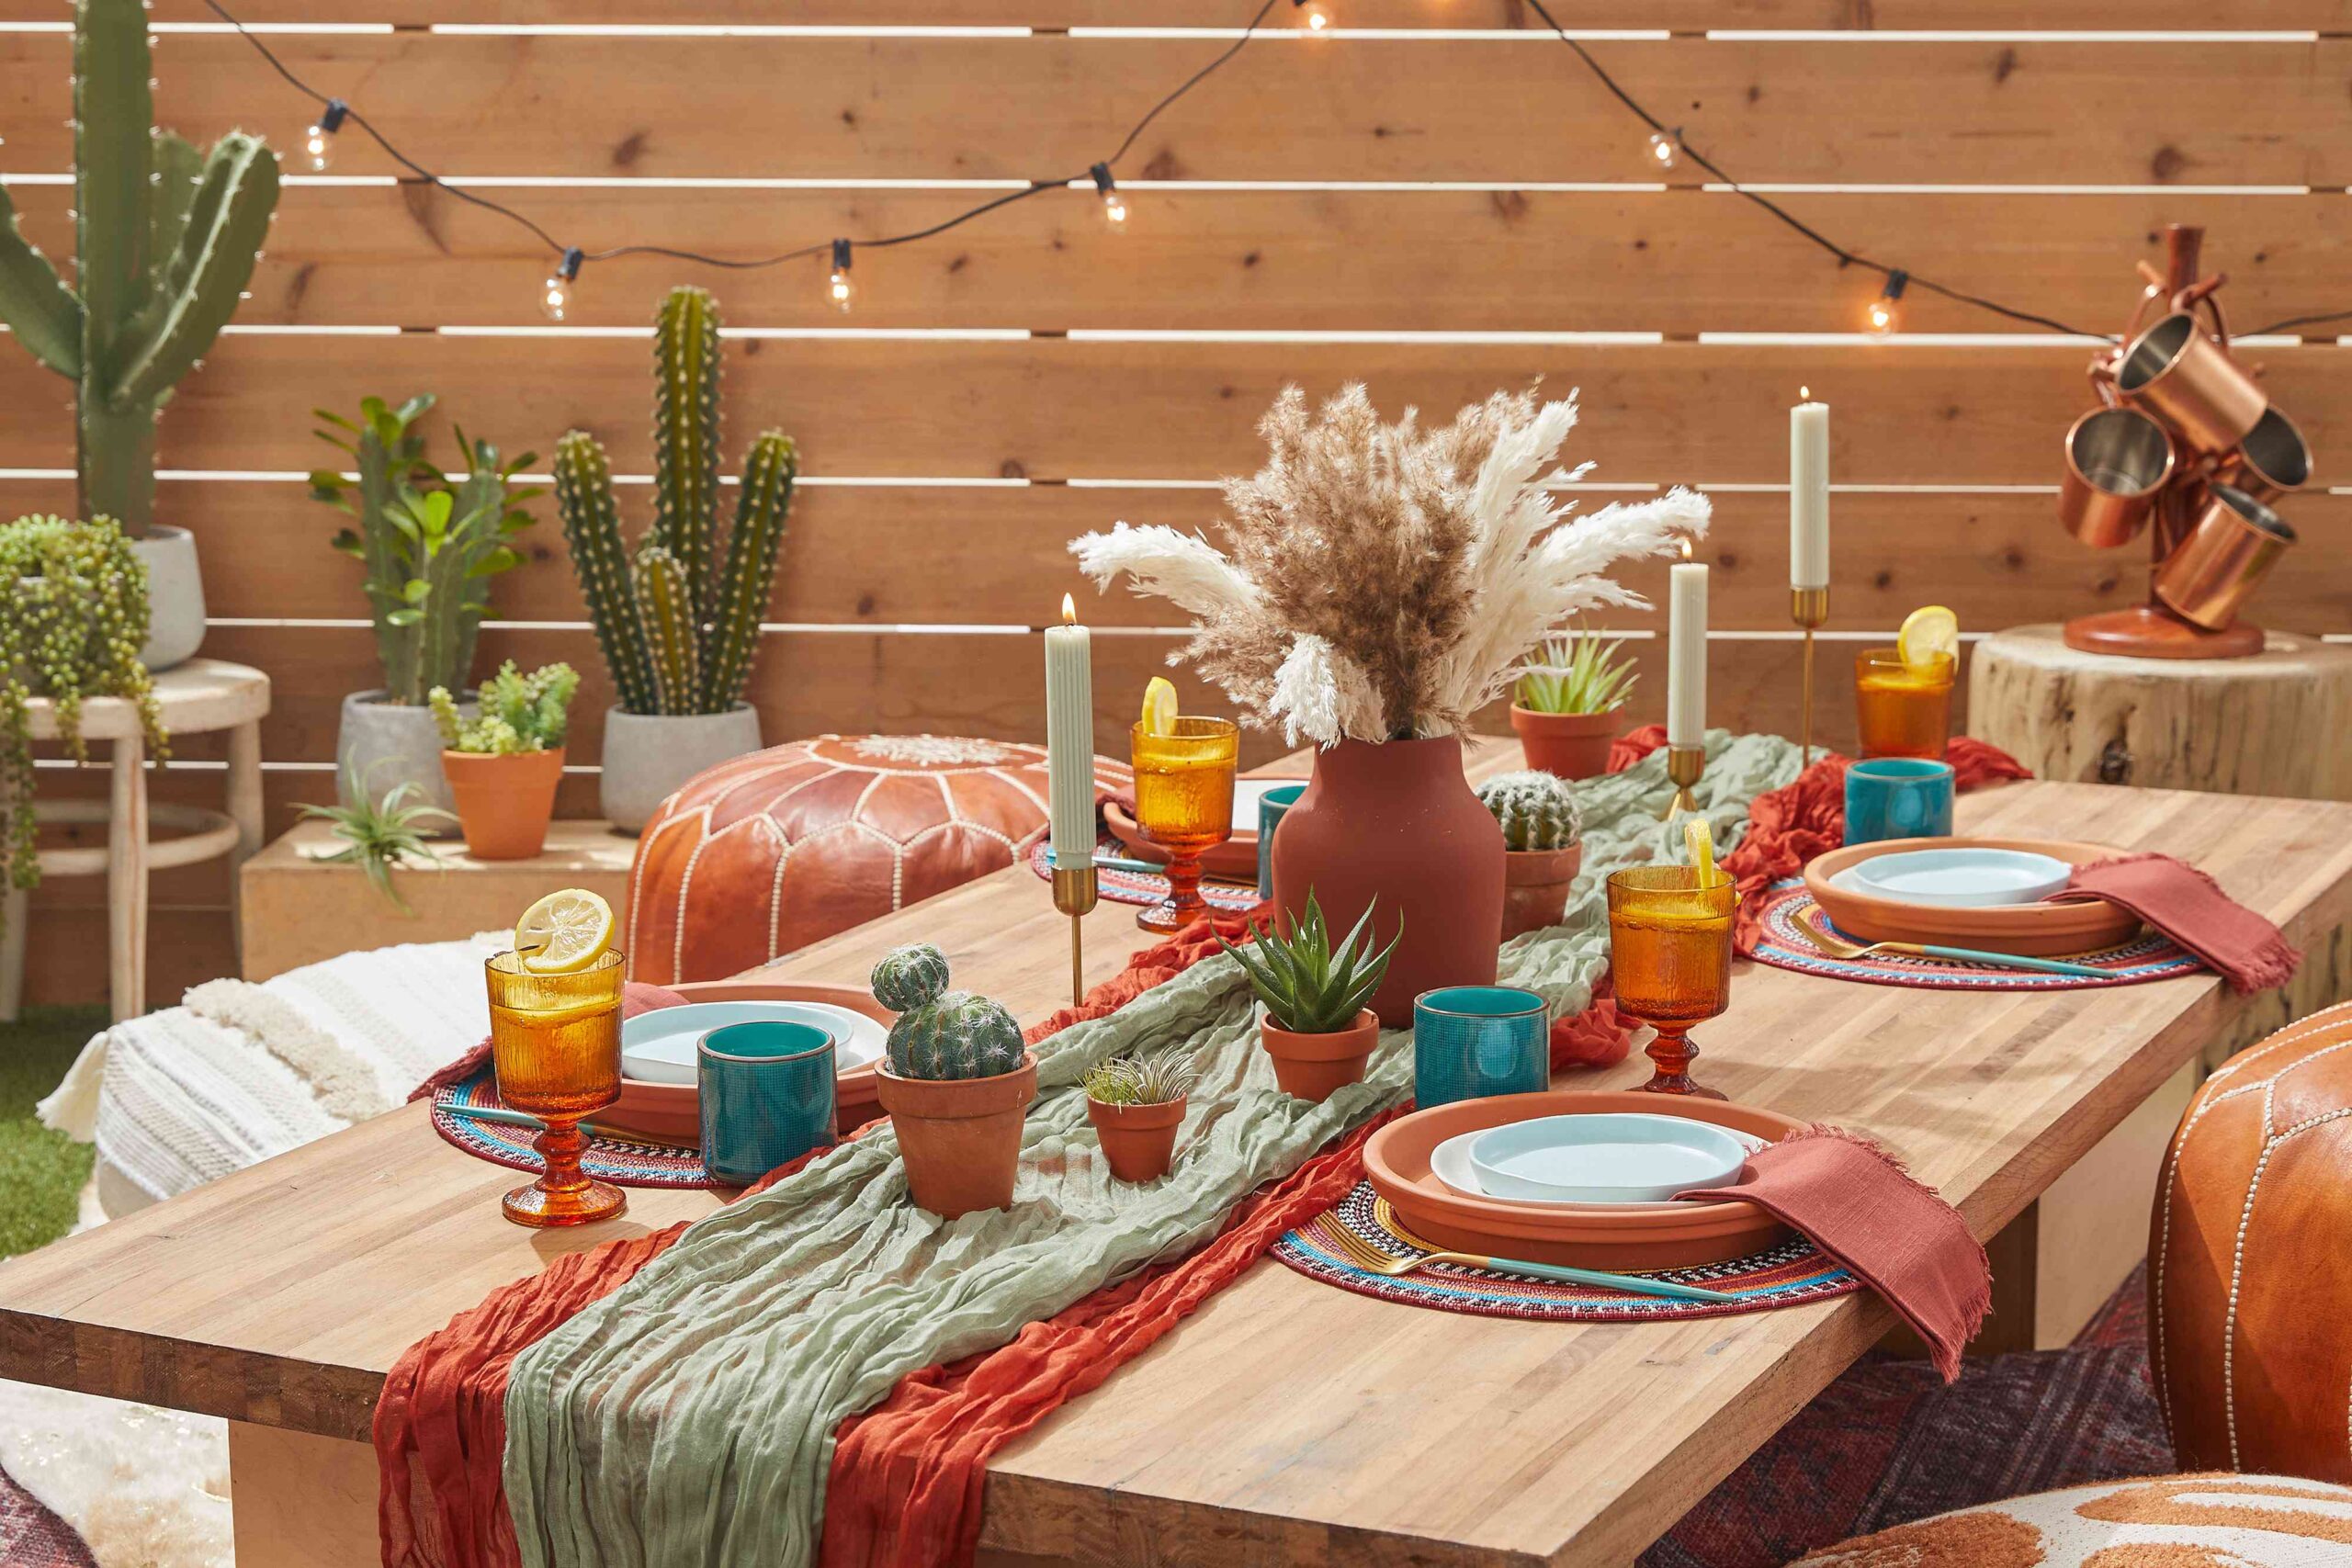 10 Creative Ideas for Making Your Outdoor Event Memorable